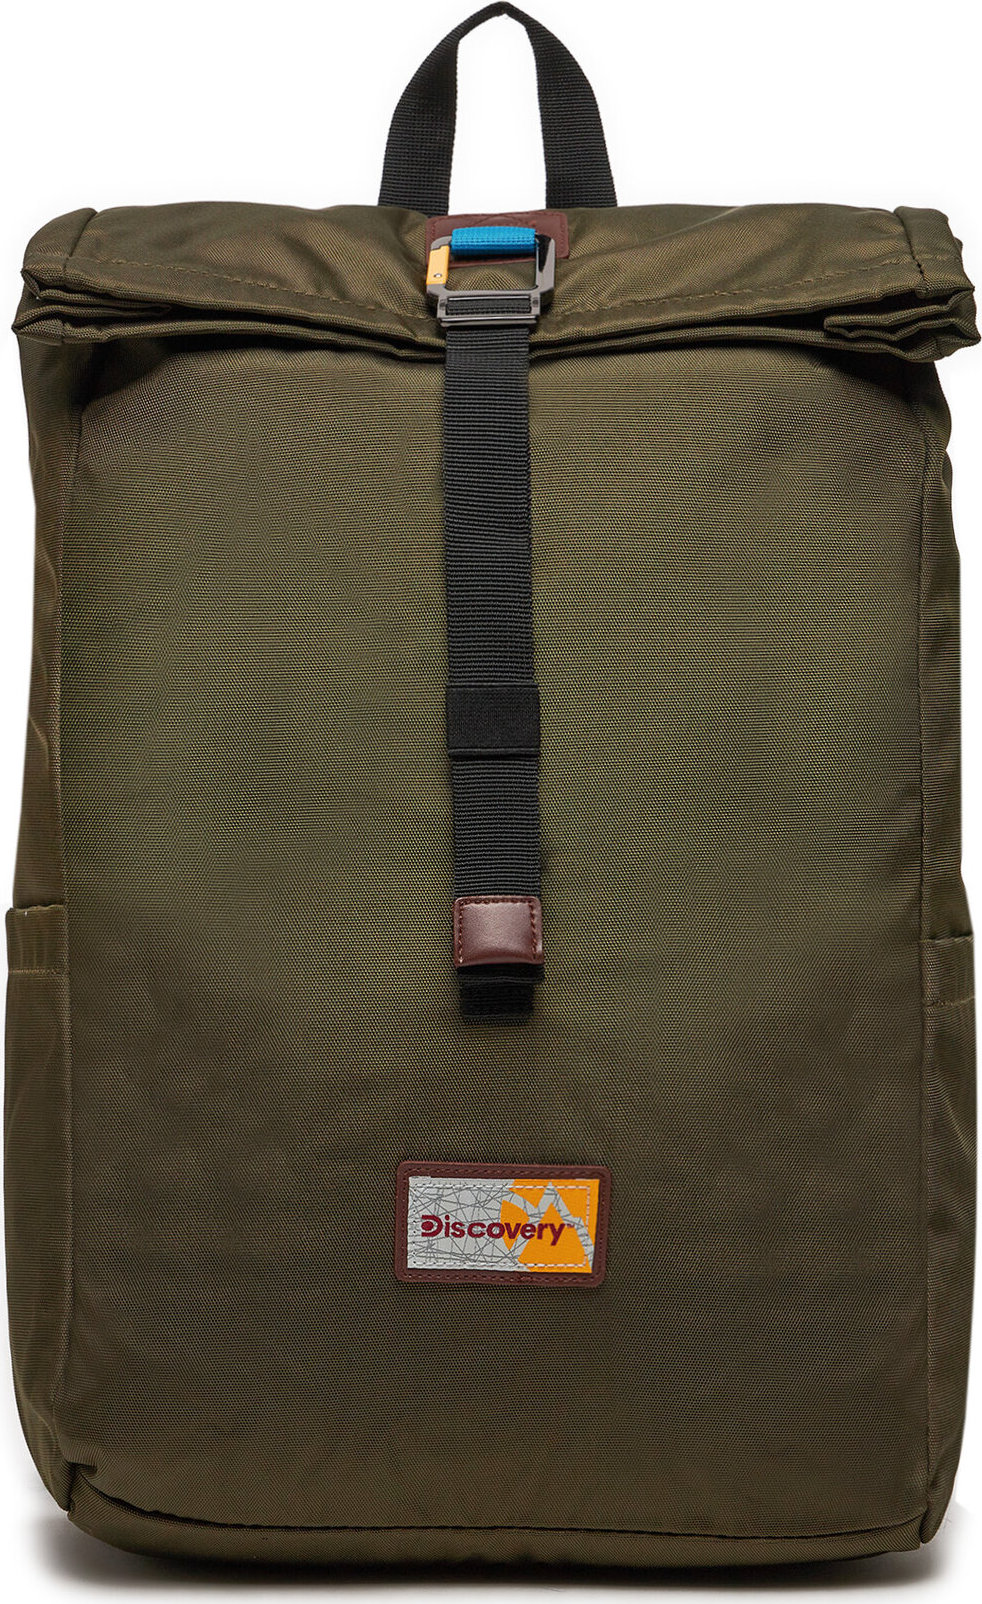 Batoh Discovery Roll Top Backpack D00722.11 Khaki